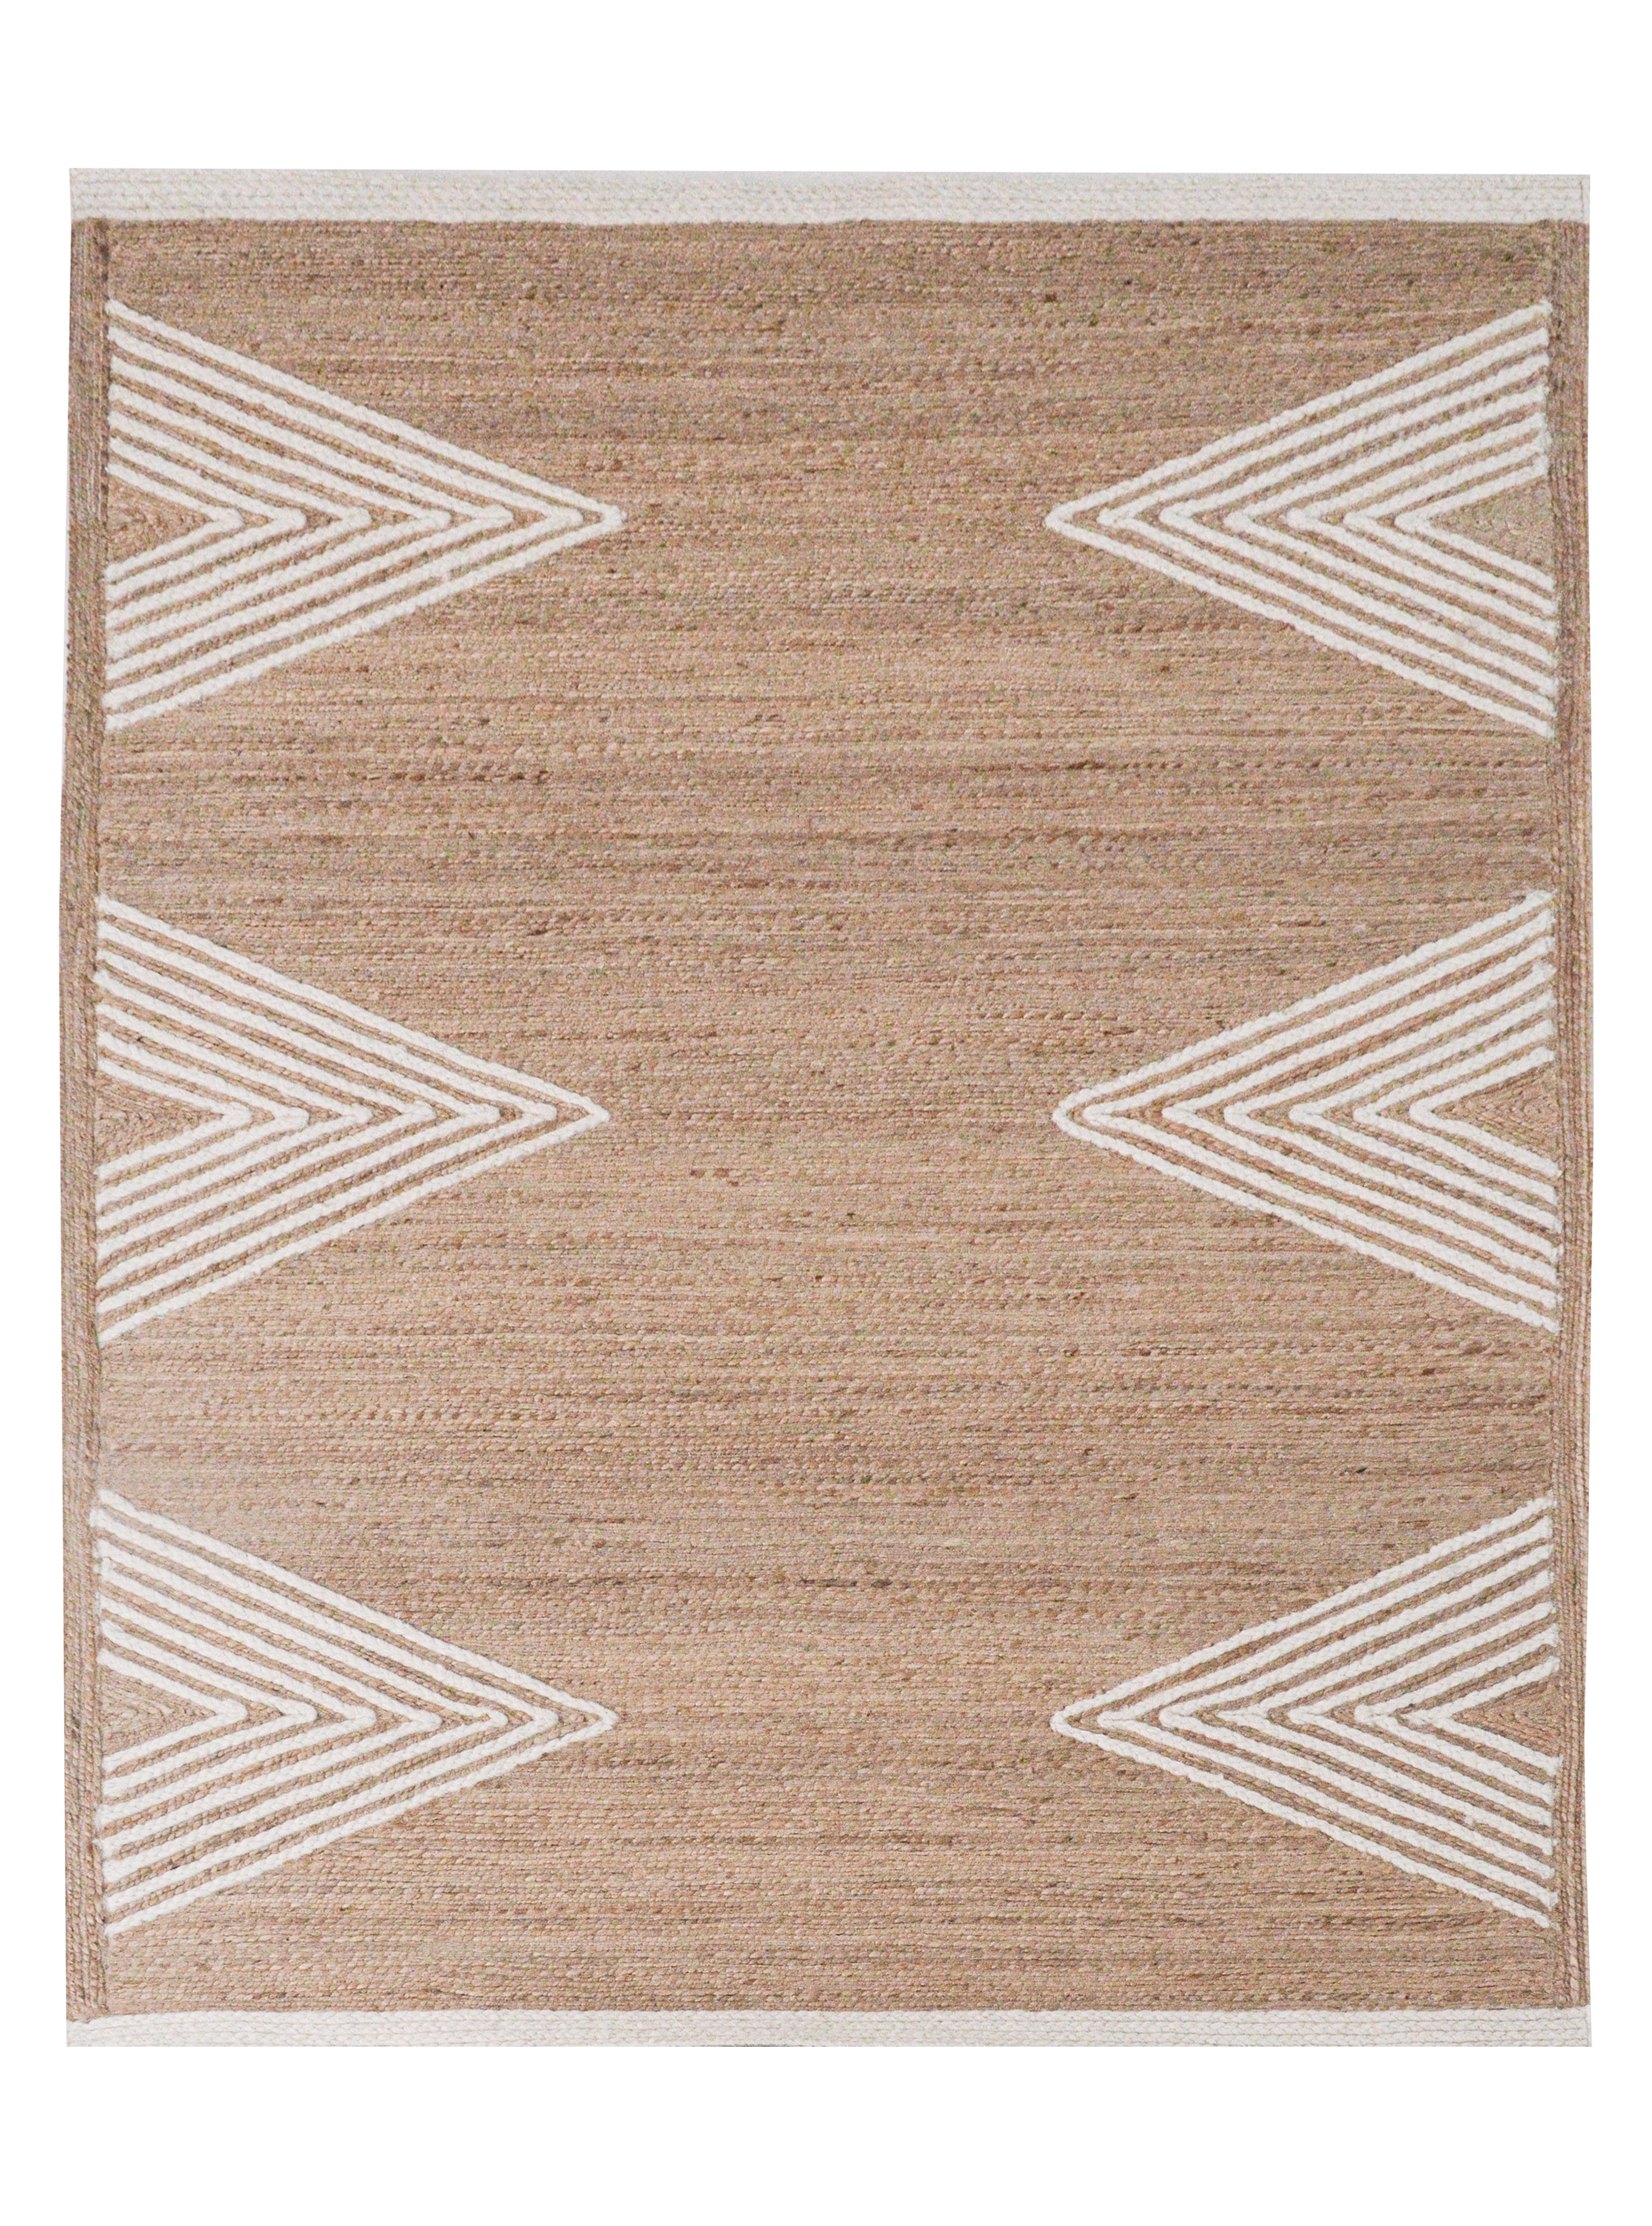 Load image into Gallery viewer, Triangles White Jute and Wool Rug